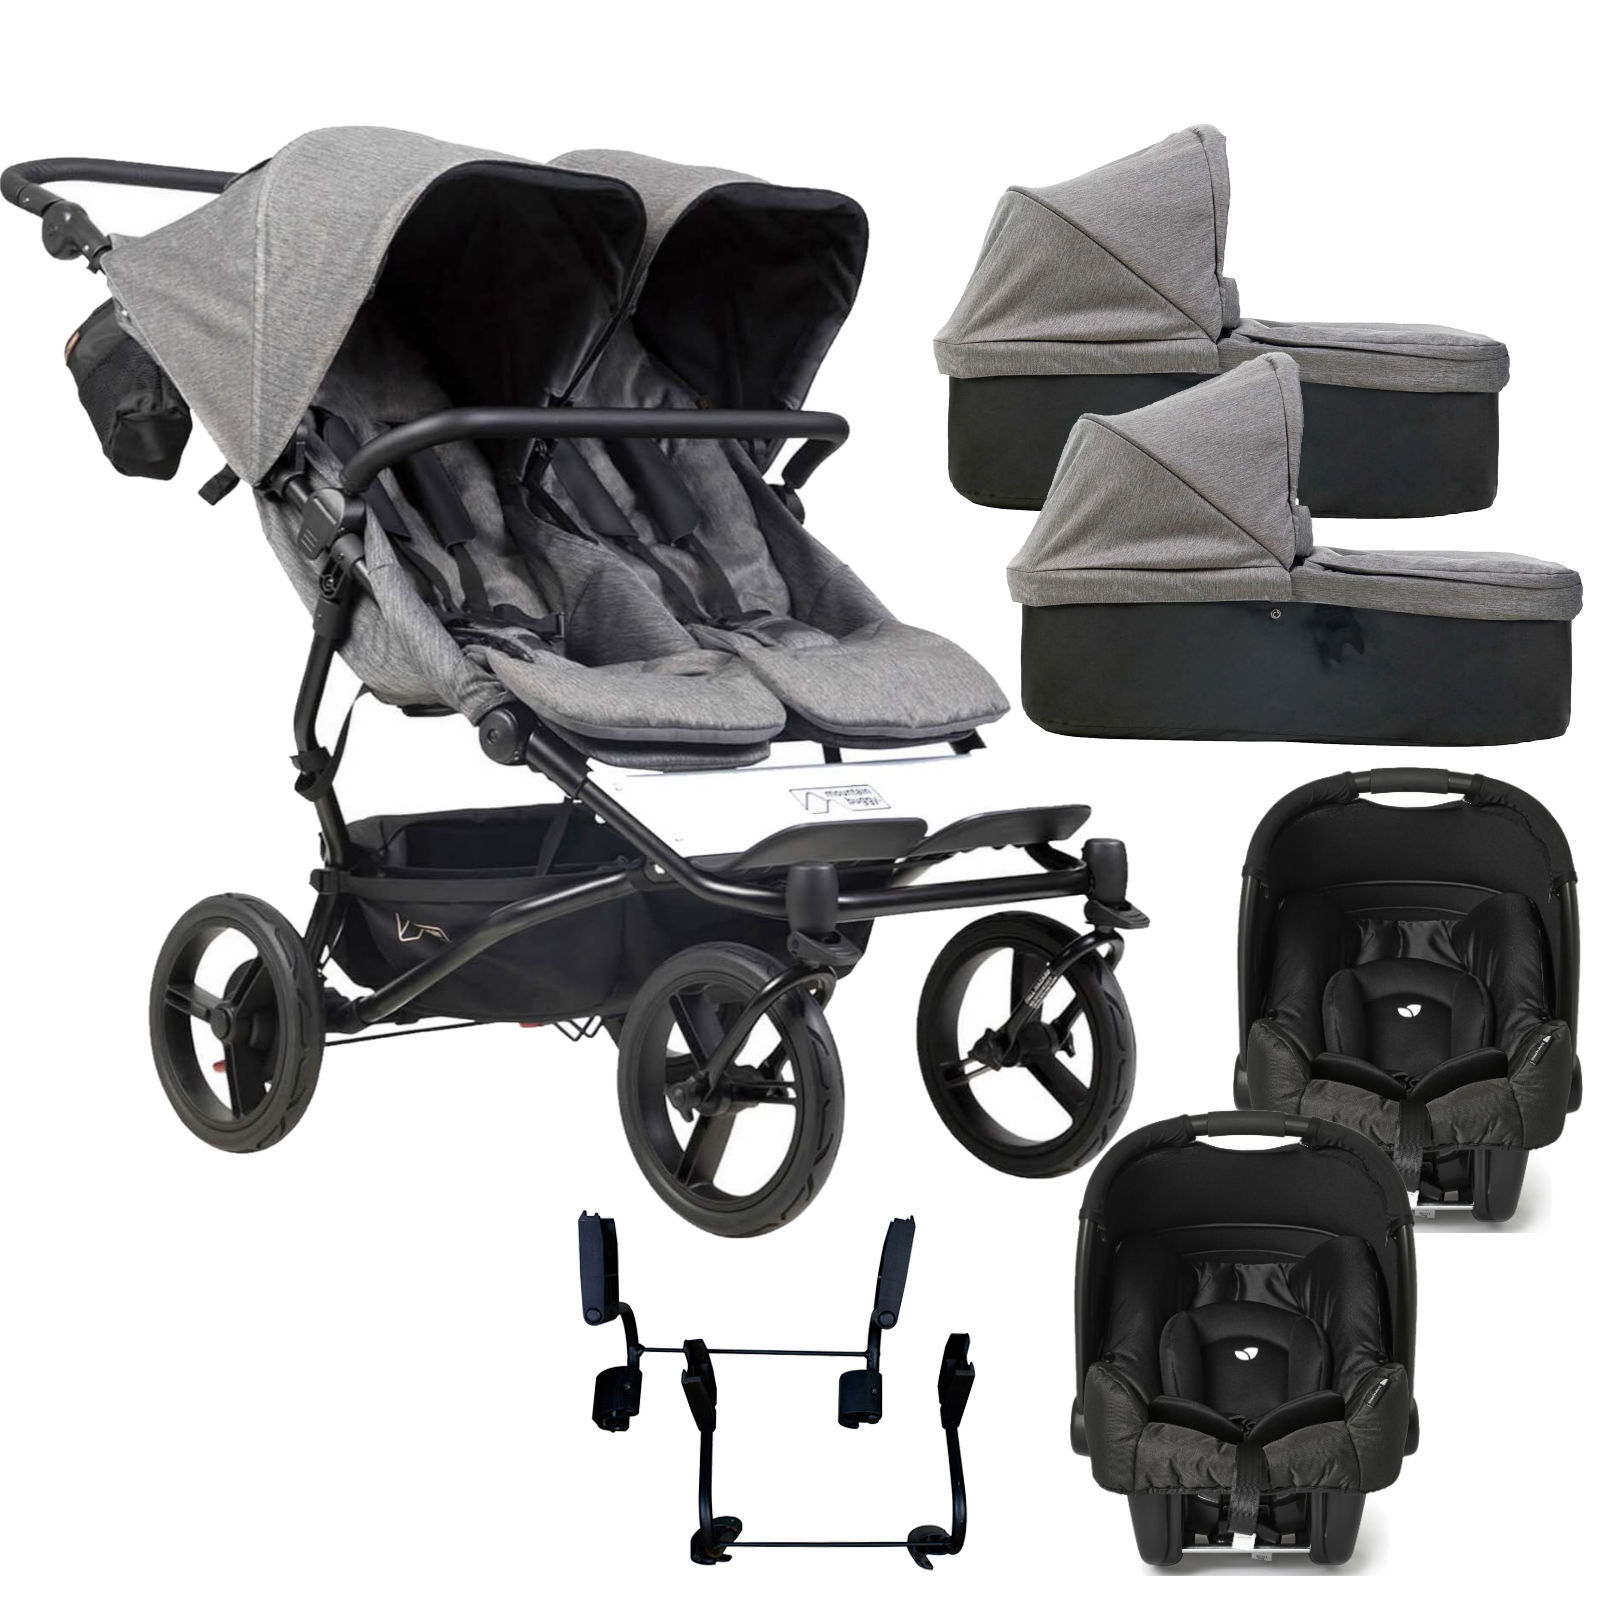 Mountain Buggy Duet Luxury Twin Double (Gemm) Travel System With 2 Carrycots - Herringbone